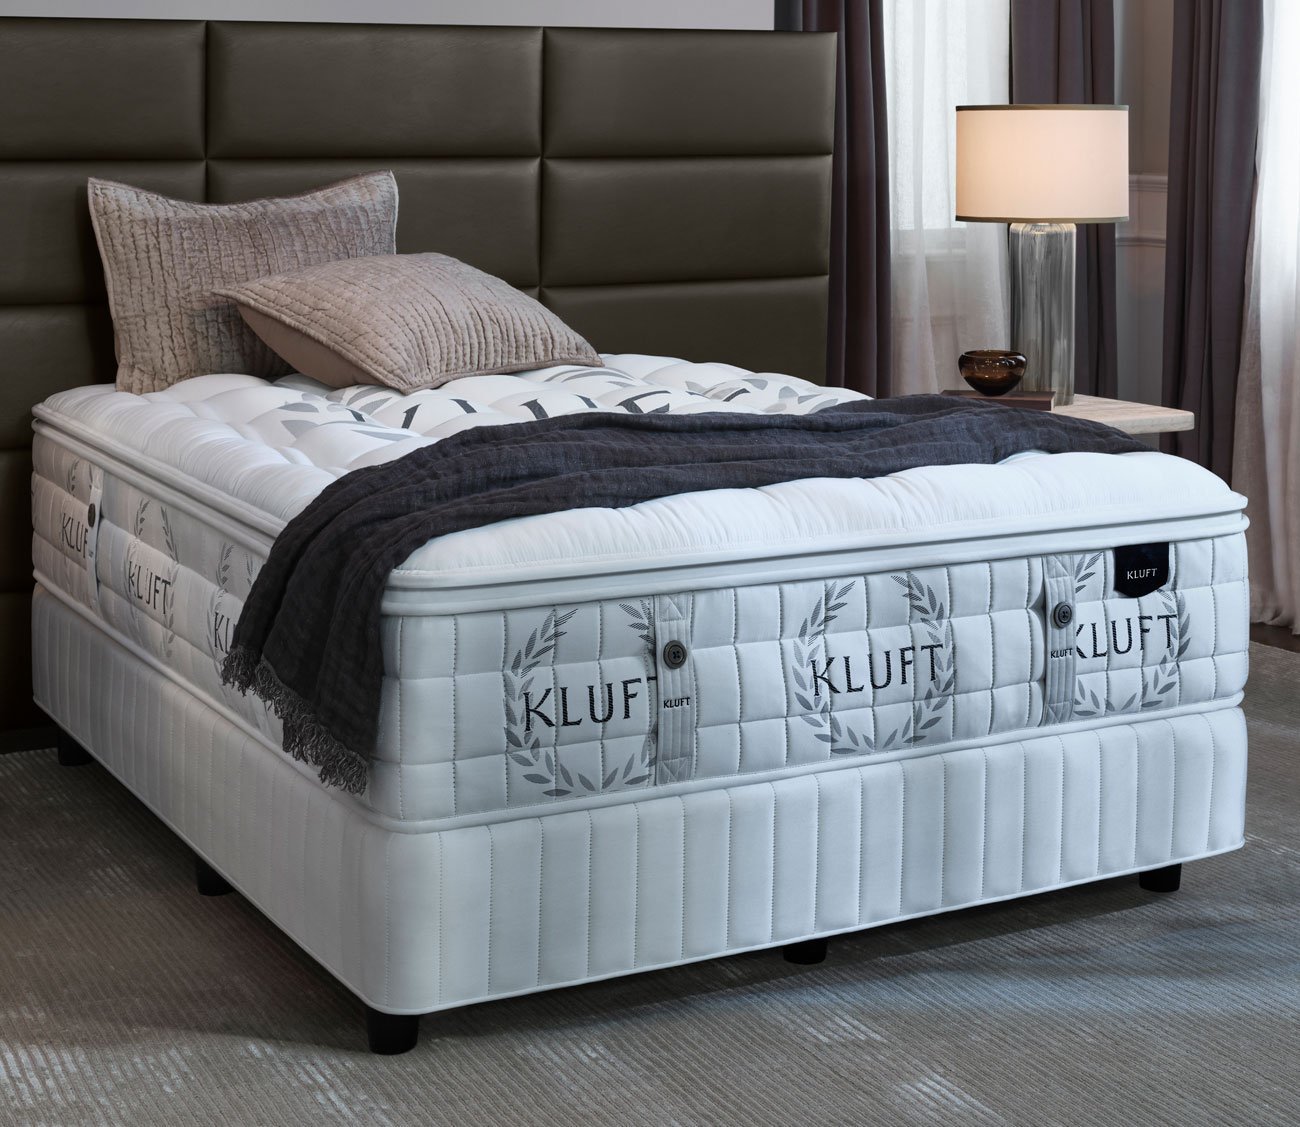 Imperial Luxetop Plush Mattress by Kluft